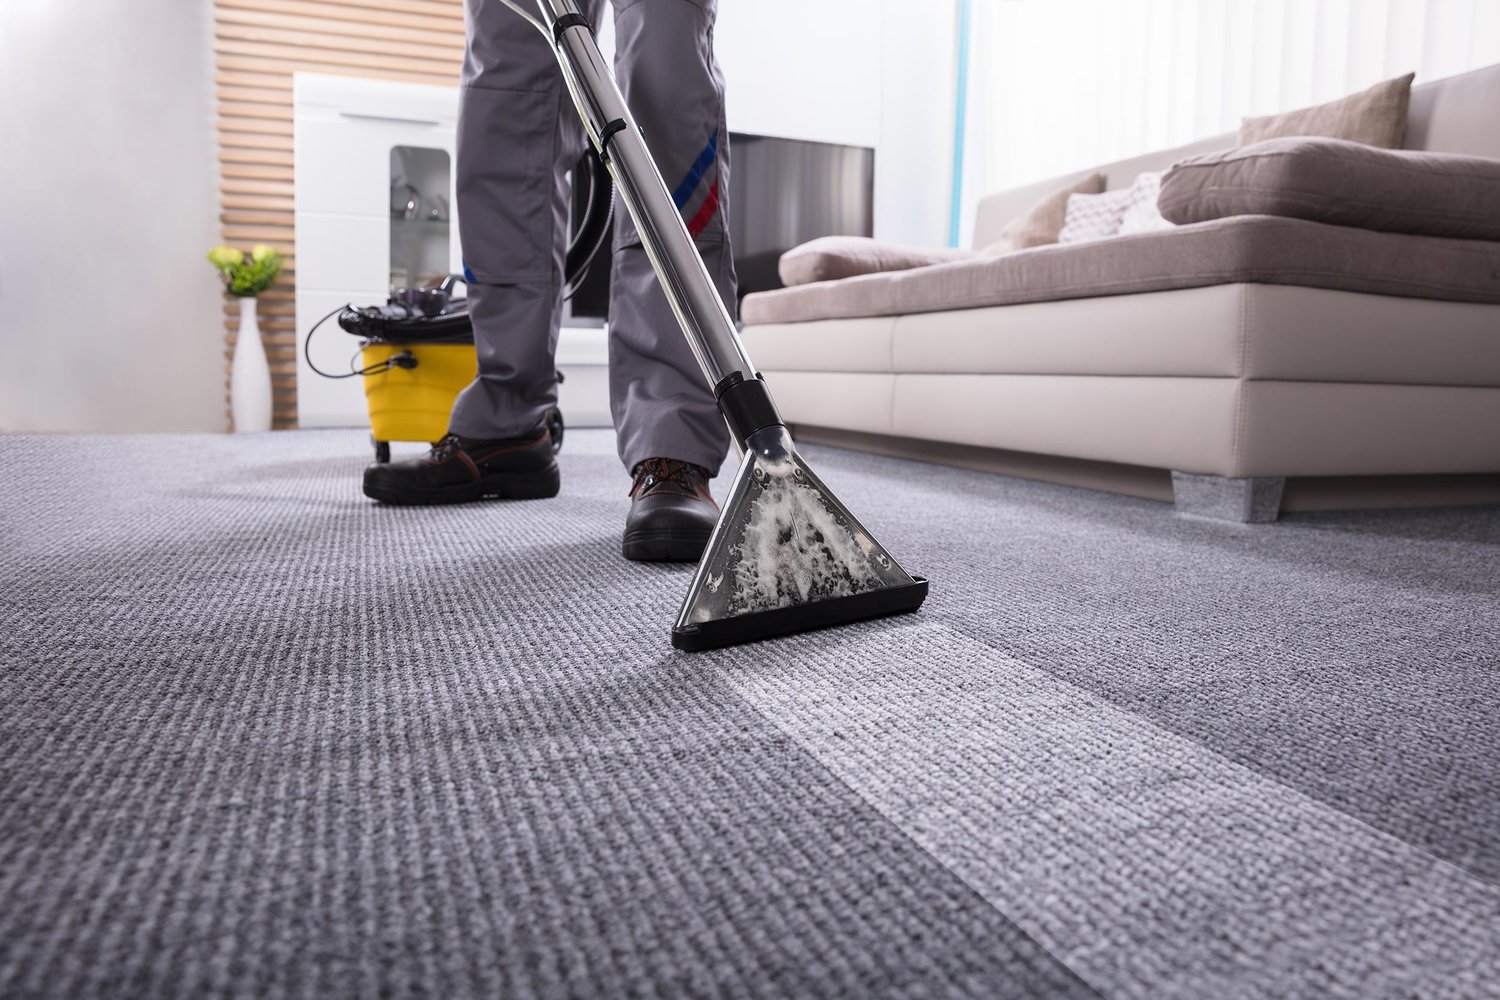 Carpet cleaning services in Martinez